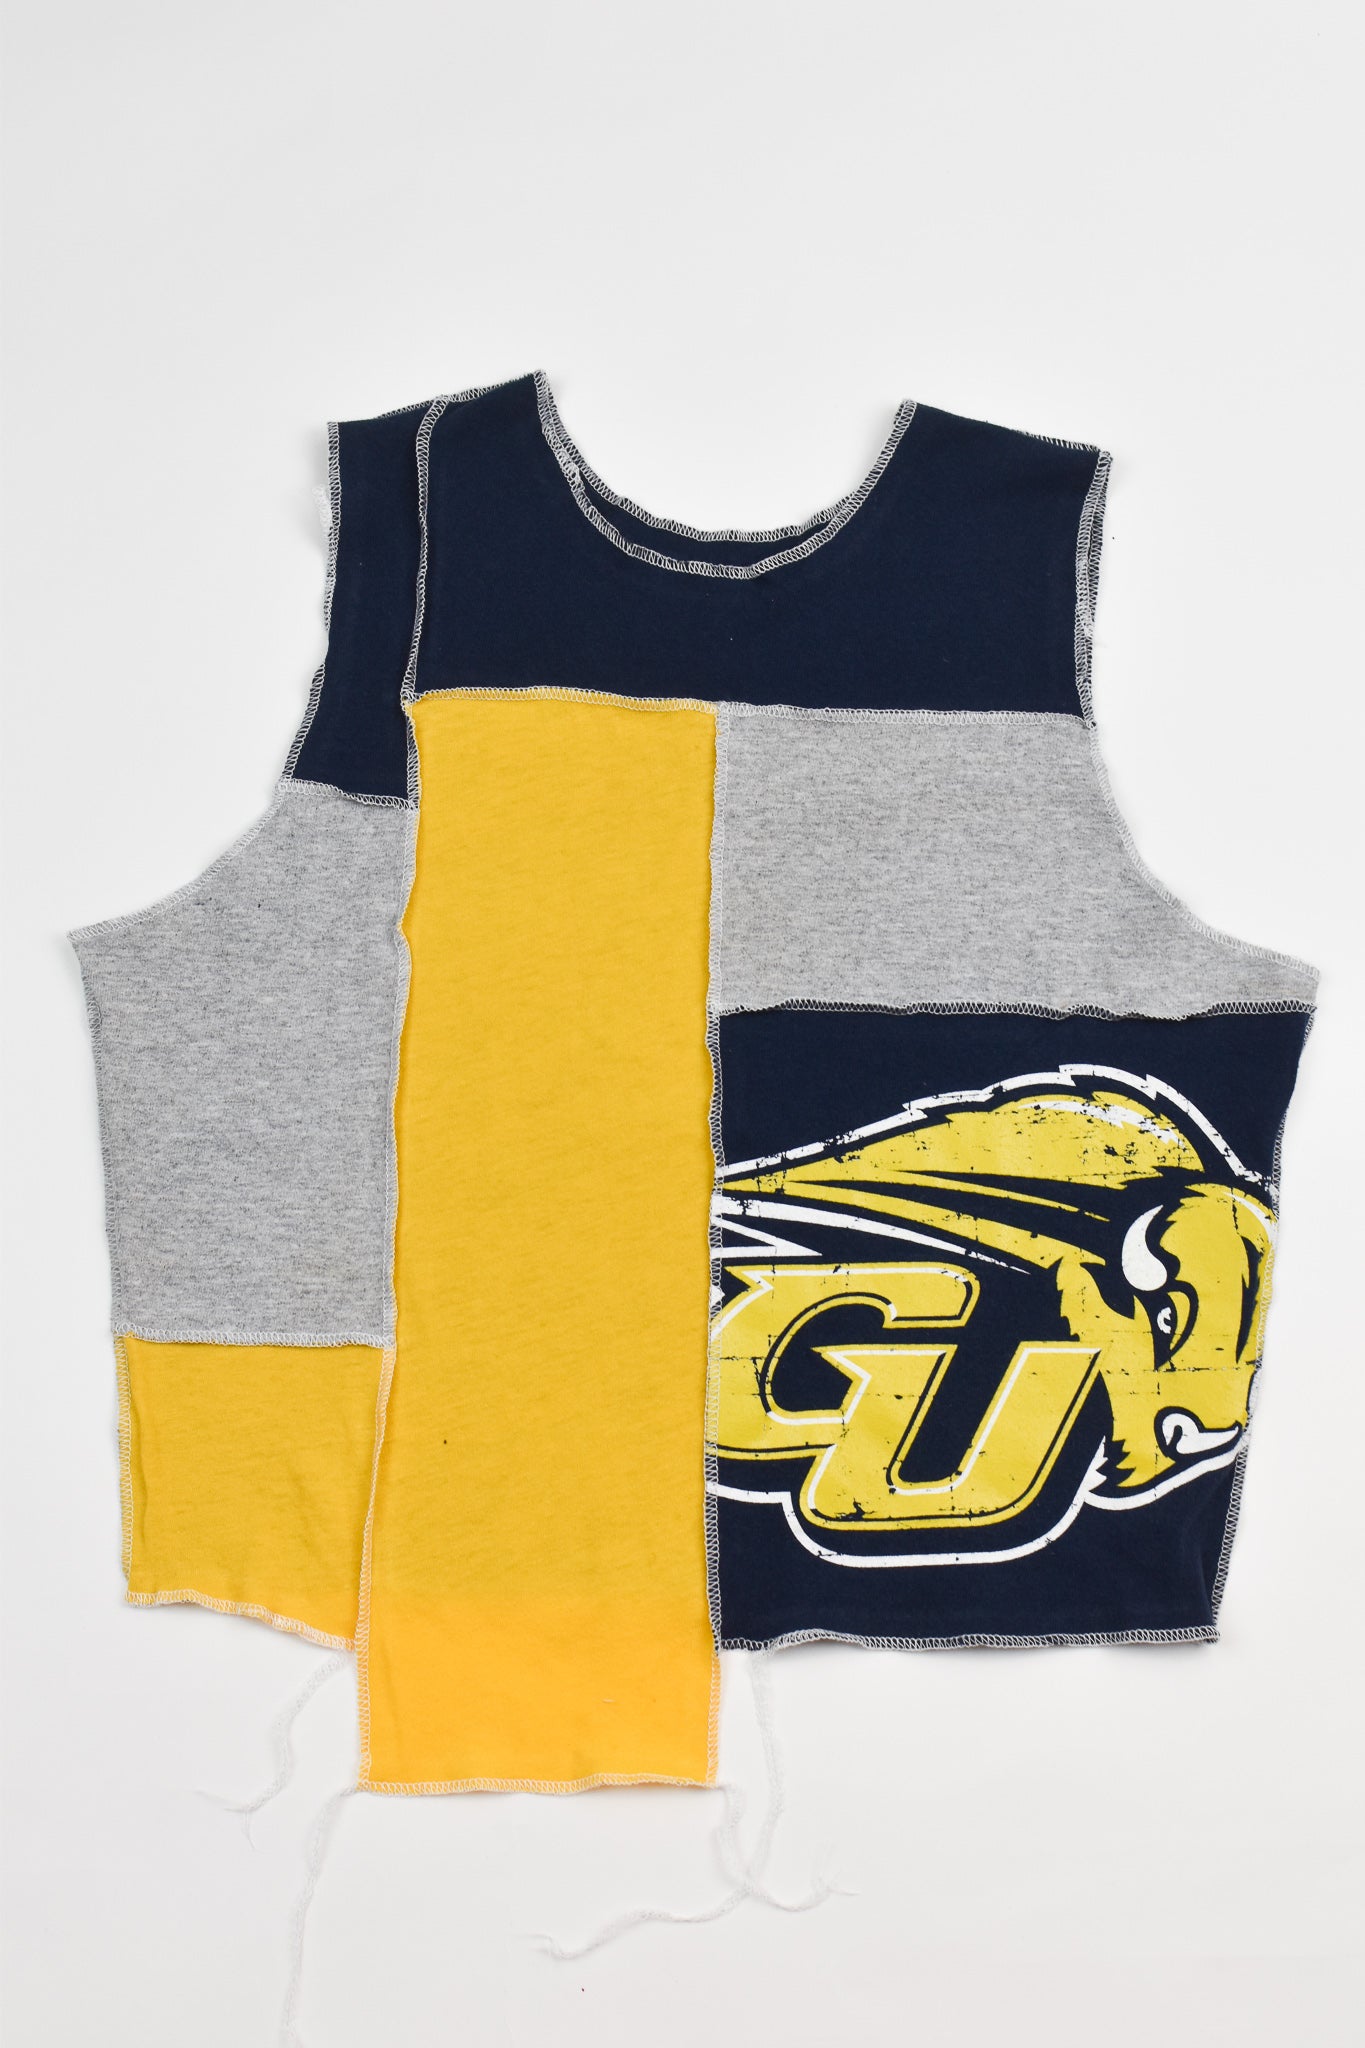 Upcycled Gallaudet Scrappy Tank Top